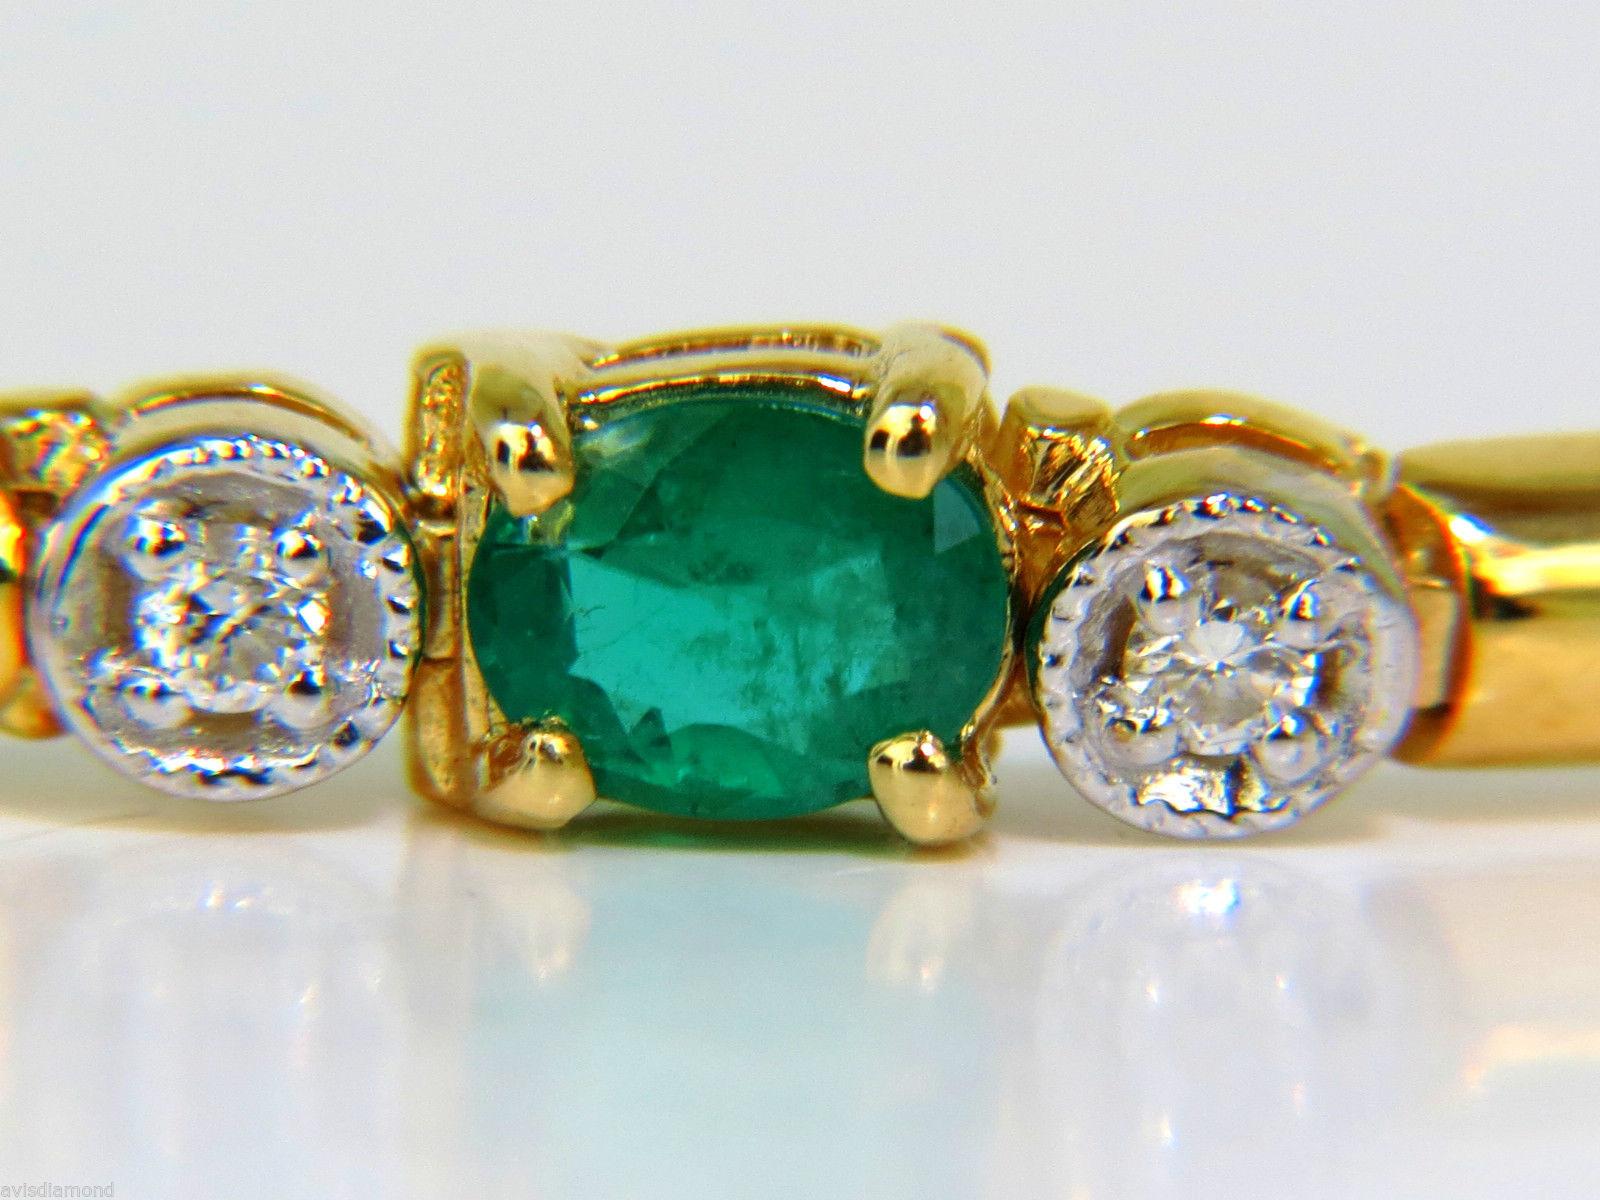 1.75ct. Natural Emeralds.

Total of 7 

Clean, and transparent

Range: 5.2X4.2mm

Rich, vibrant greens



Diamonds: 

.60ct. 

H-color, Vs-2 clarity.

Full cuts, rounds 

14kt. yellow gold & 11 grams

6 3/4 inches long



$4500 appraisal will 